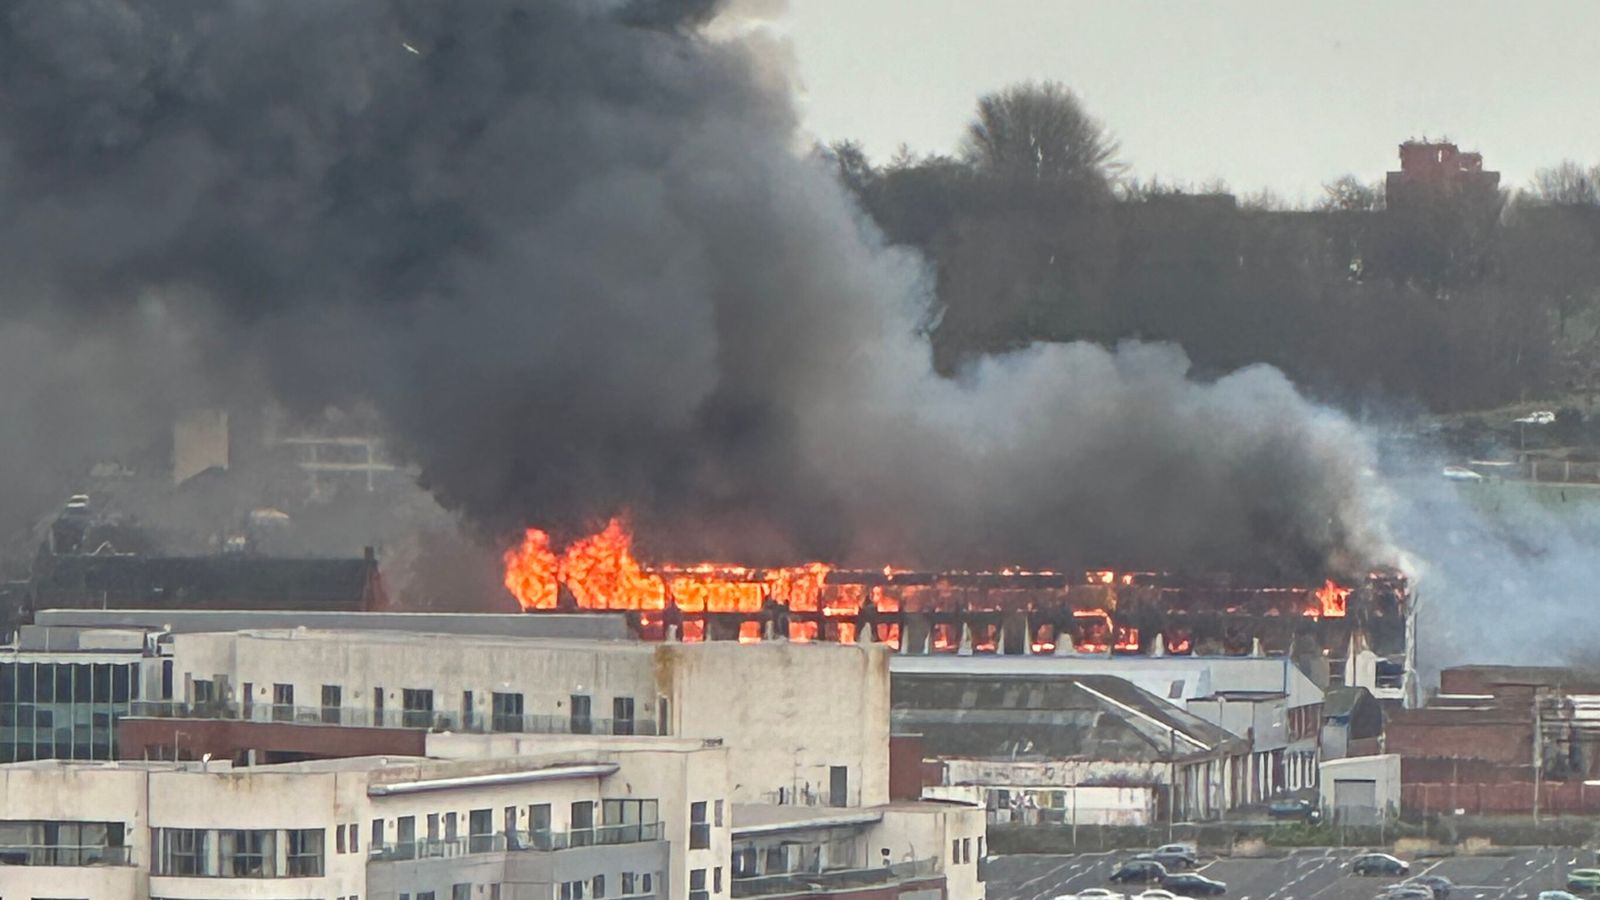 Liverpool fire: Investigation under way after huge fire ripped through four-storey building sparking major incident